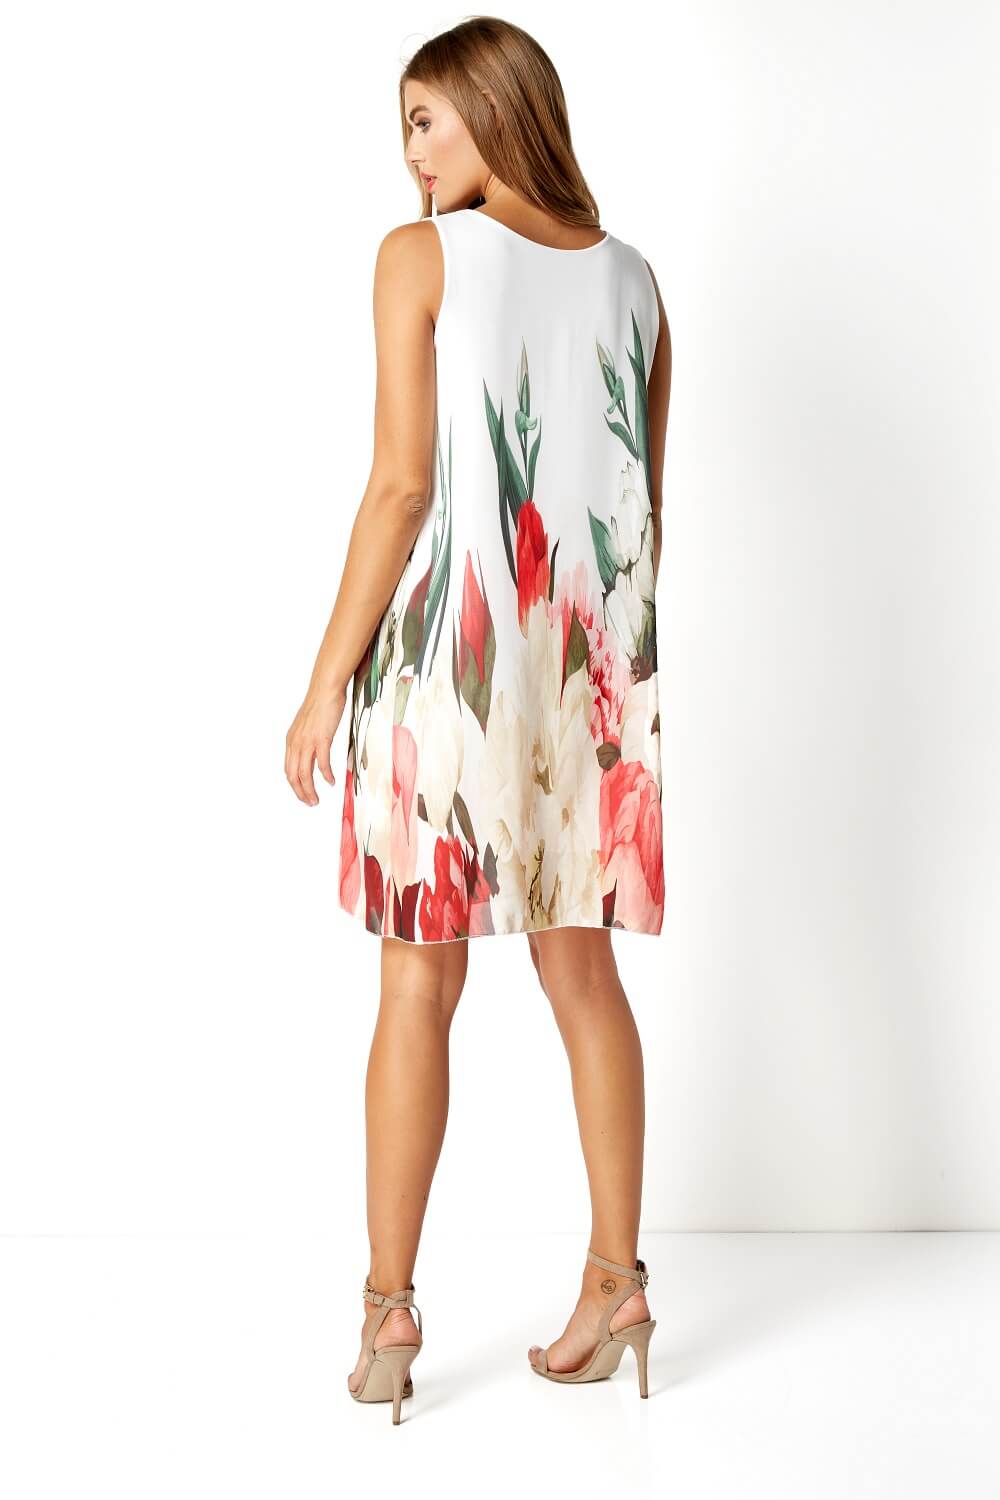 Ivory  Floral Print Swing Dress, Image 3 of 4